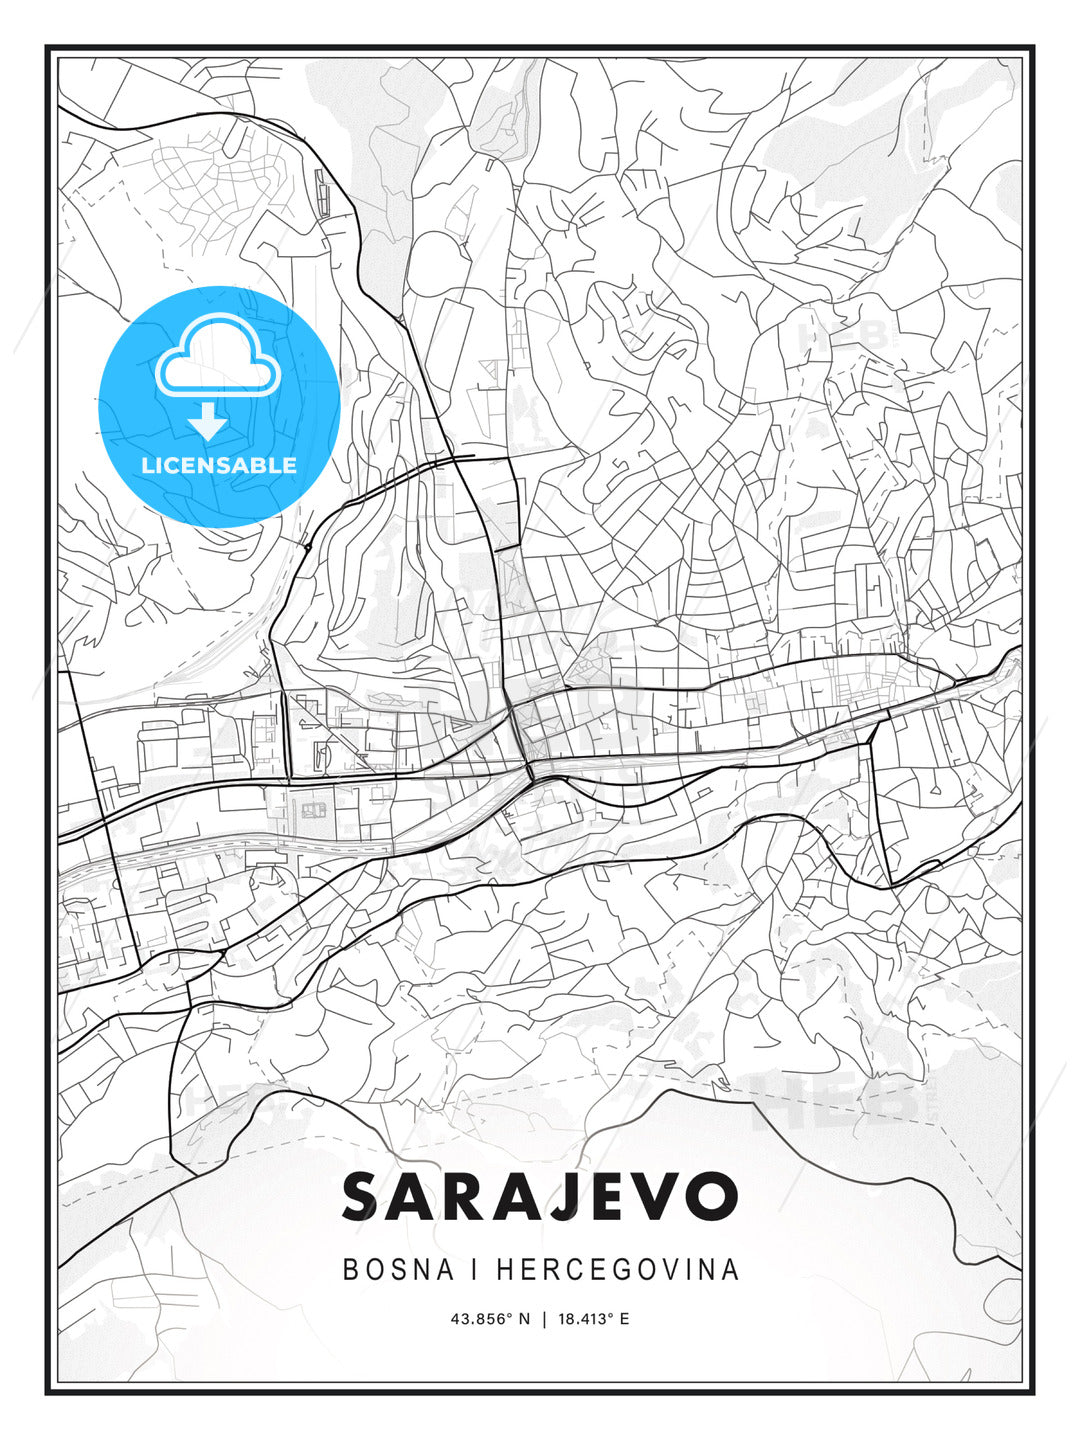 Sarajevo, Bosnia and Herzegovina, Modern Print Template in Various Formats - HEBSTREITS Sketches